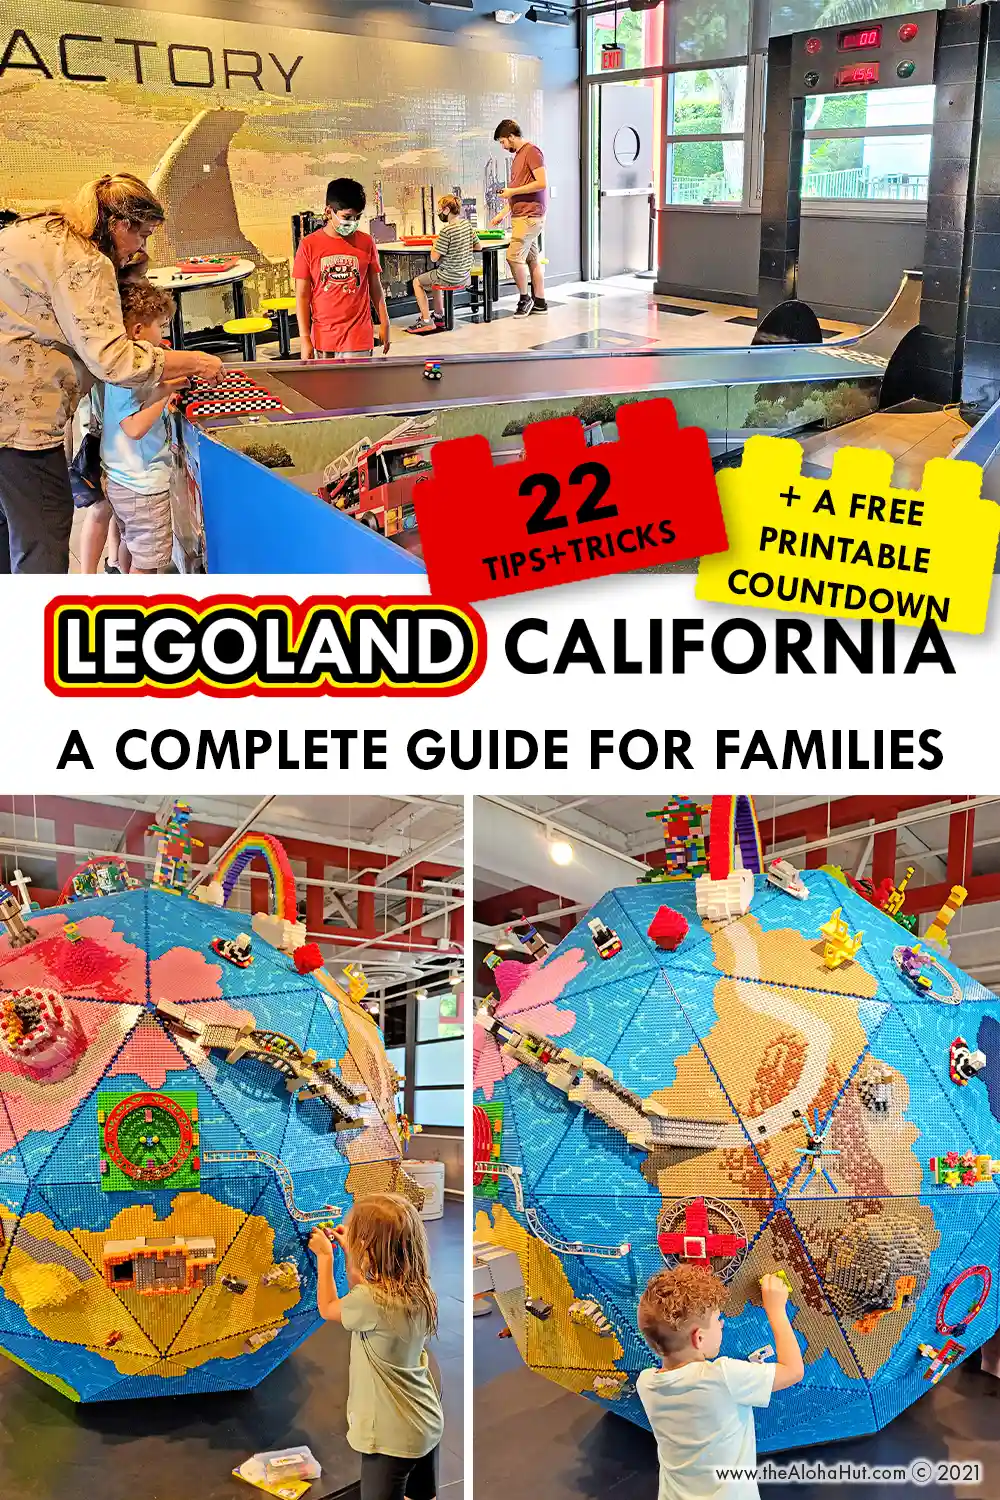 Legoland California - A Complete Guide for Families - tips & tricks